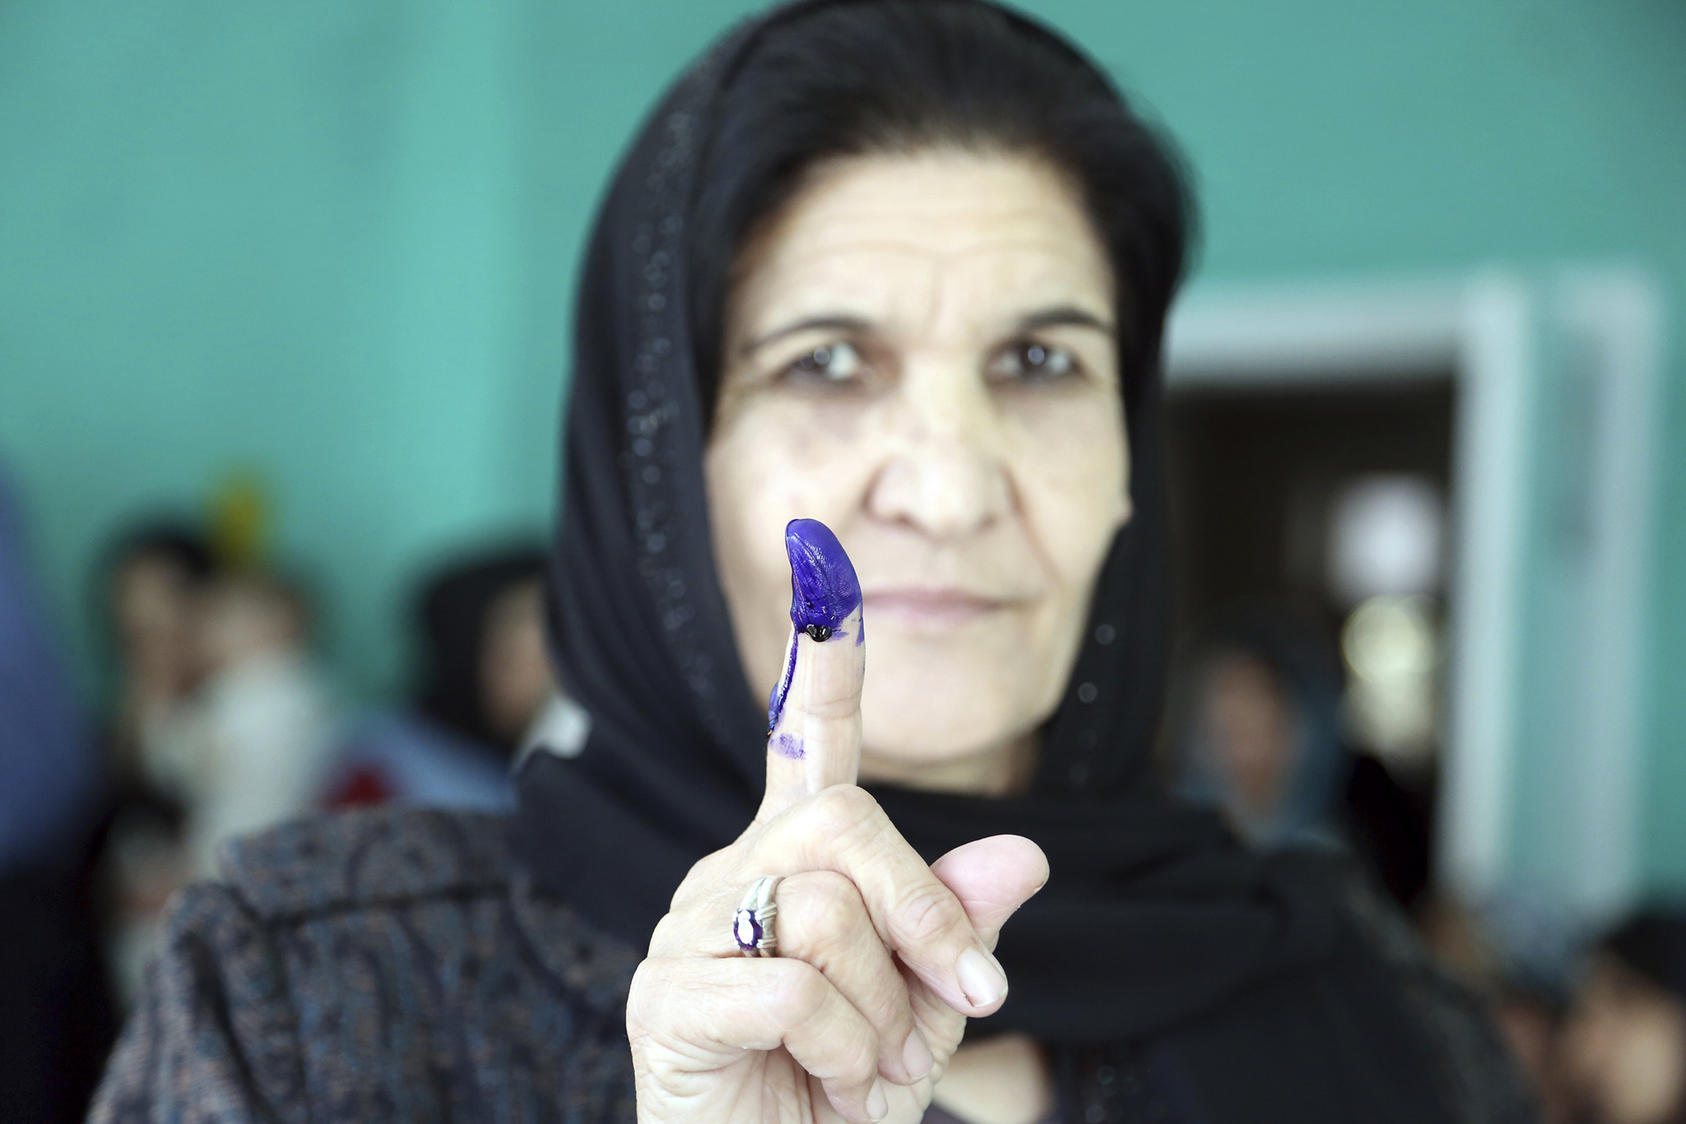 An Afghan woman shows her inked finger after casting her vote at a polling station during the parliamentary elections in Kabul on October 20, 2018. (Rahmat Gul/AP)